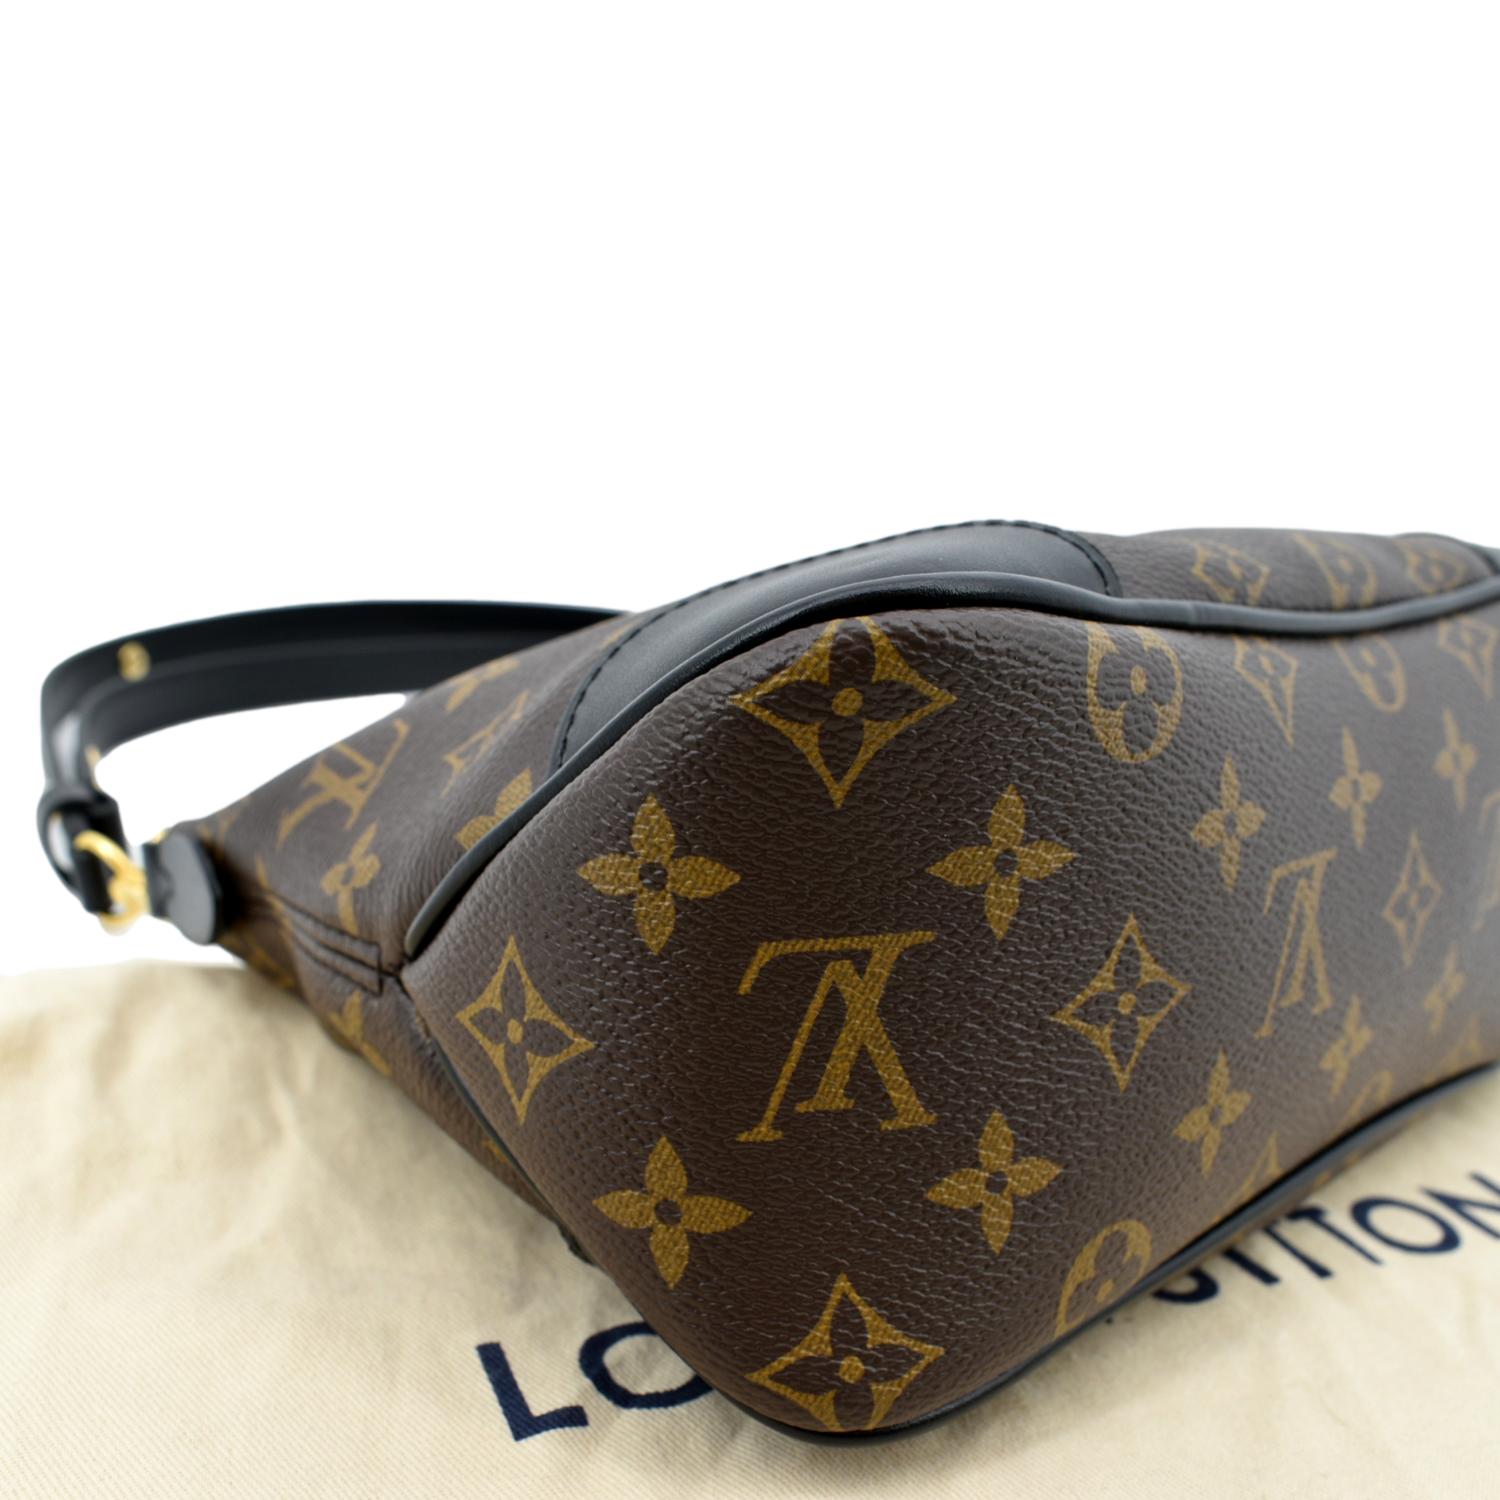 All about the NEW Louis Vuitton Boulogne bag 